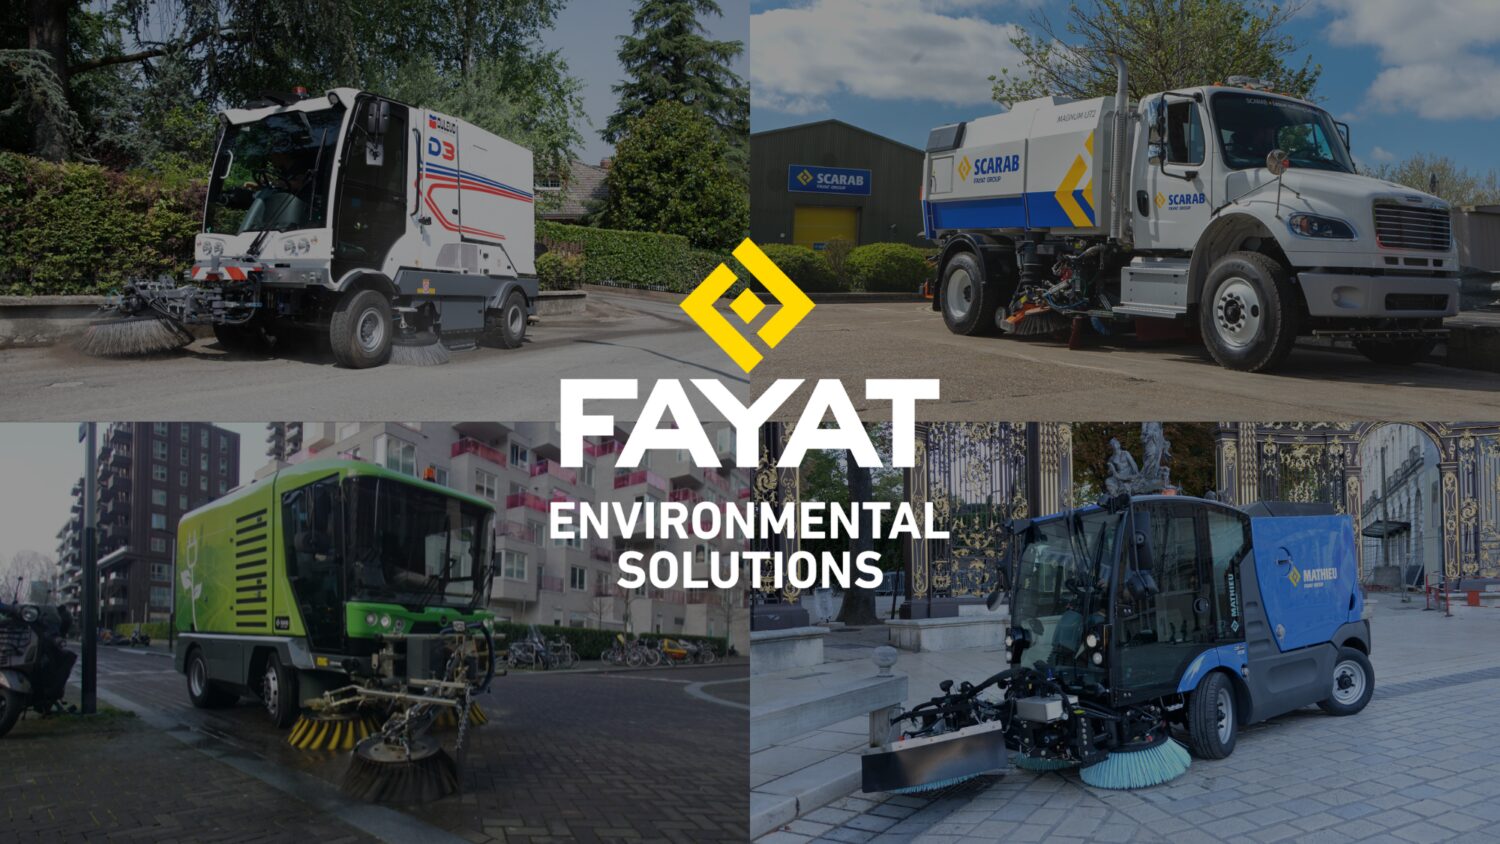 Fayat Environmental Solutions America brings four sweeper brands to PWX 2022